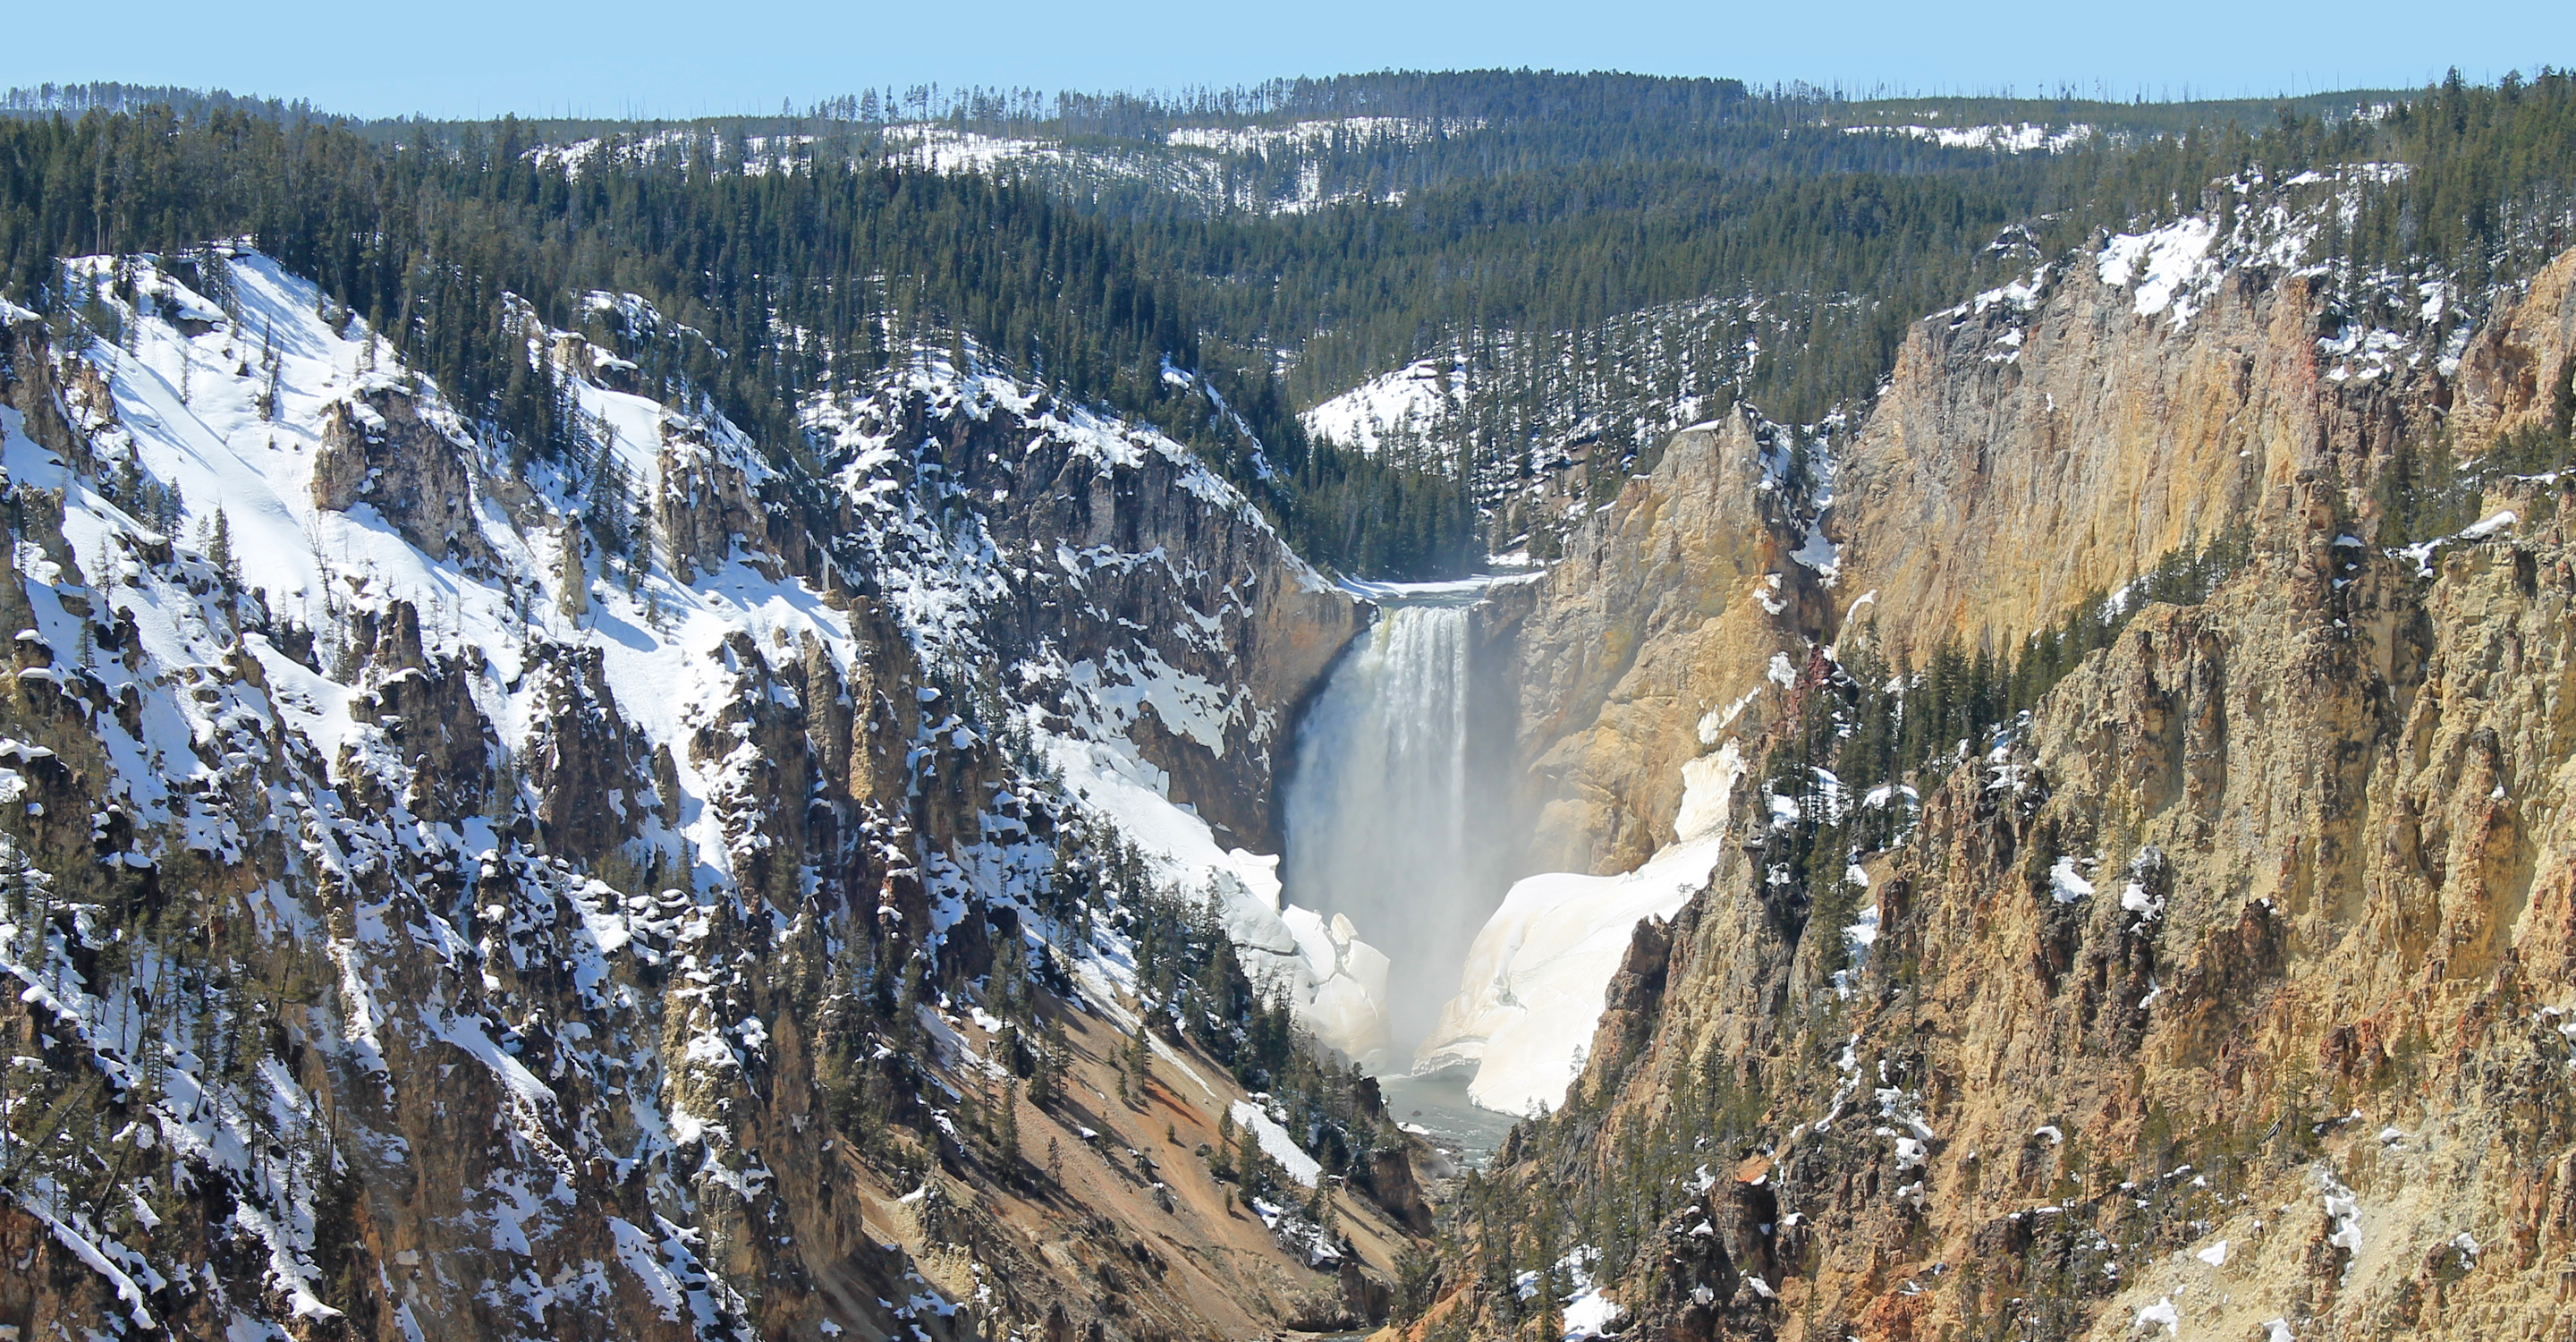 Upper Yellowstone Falls in Yellowstone National Park, United States